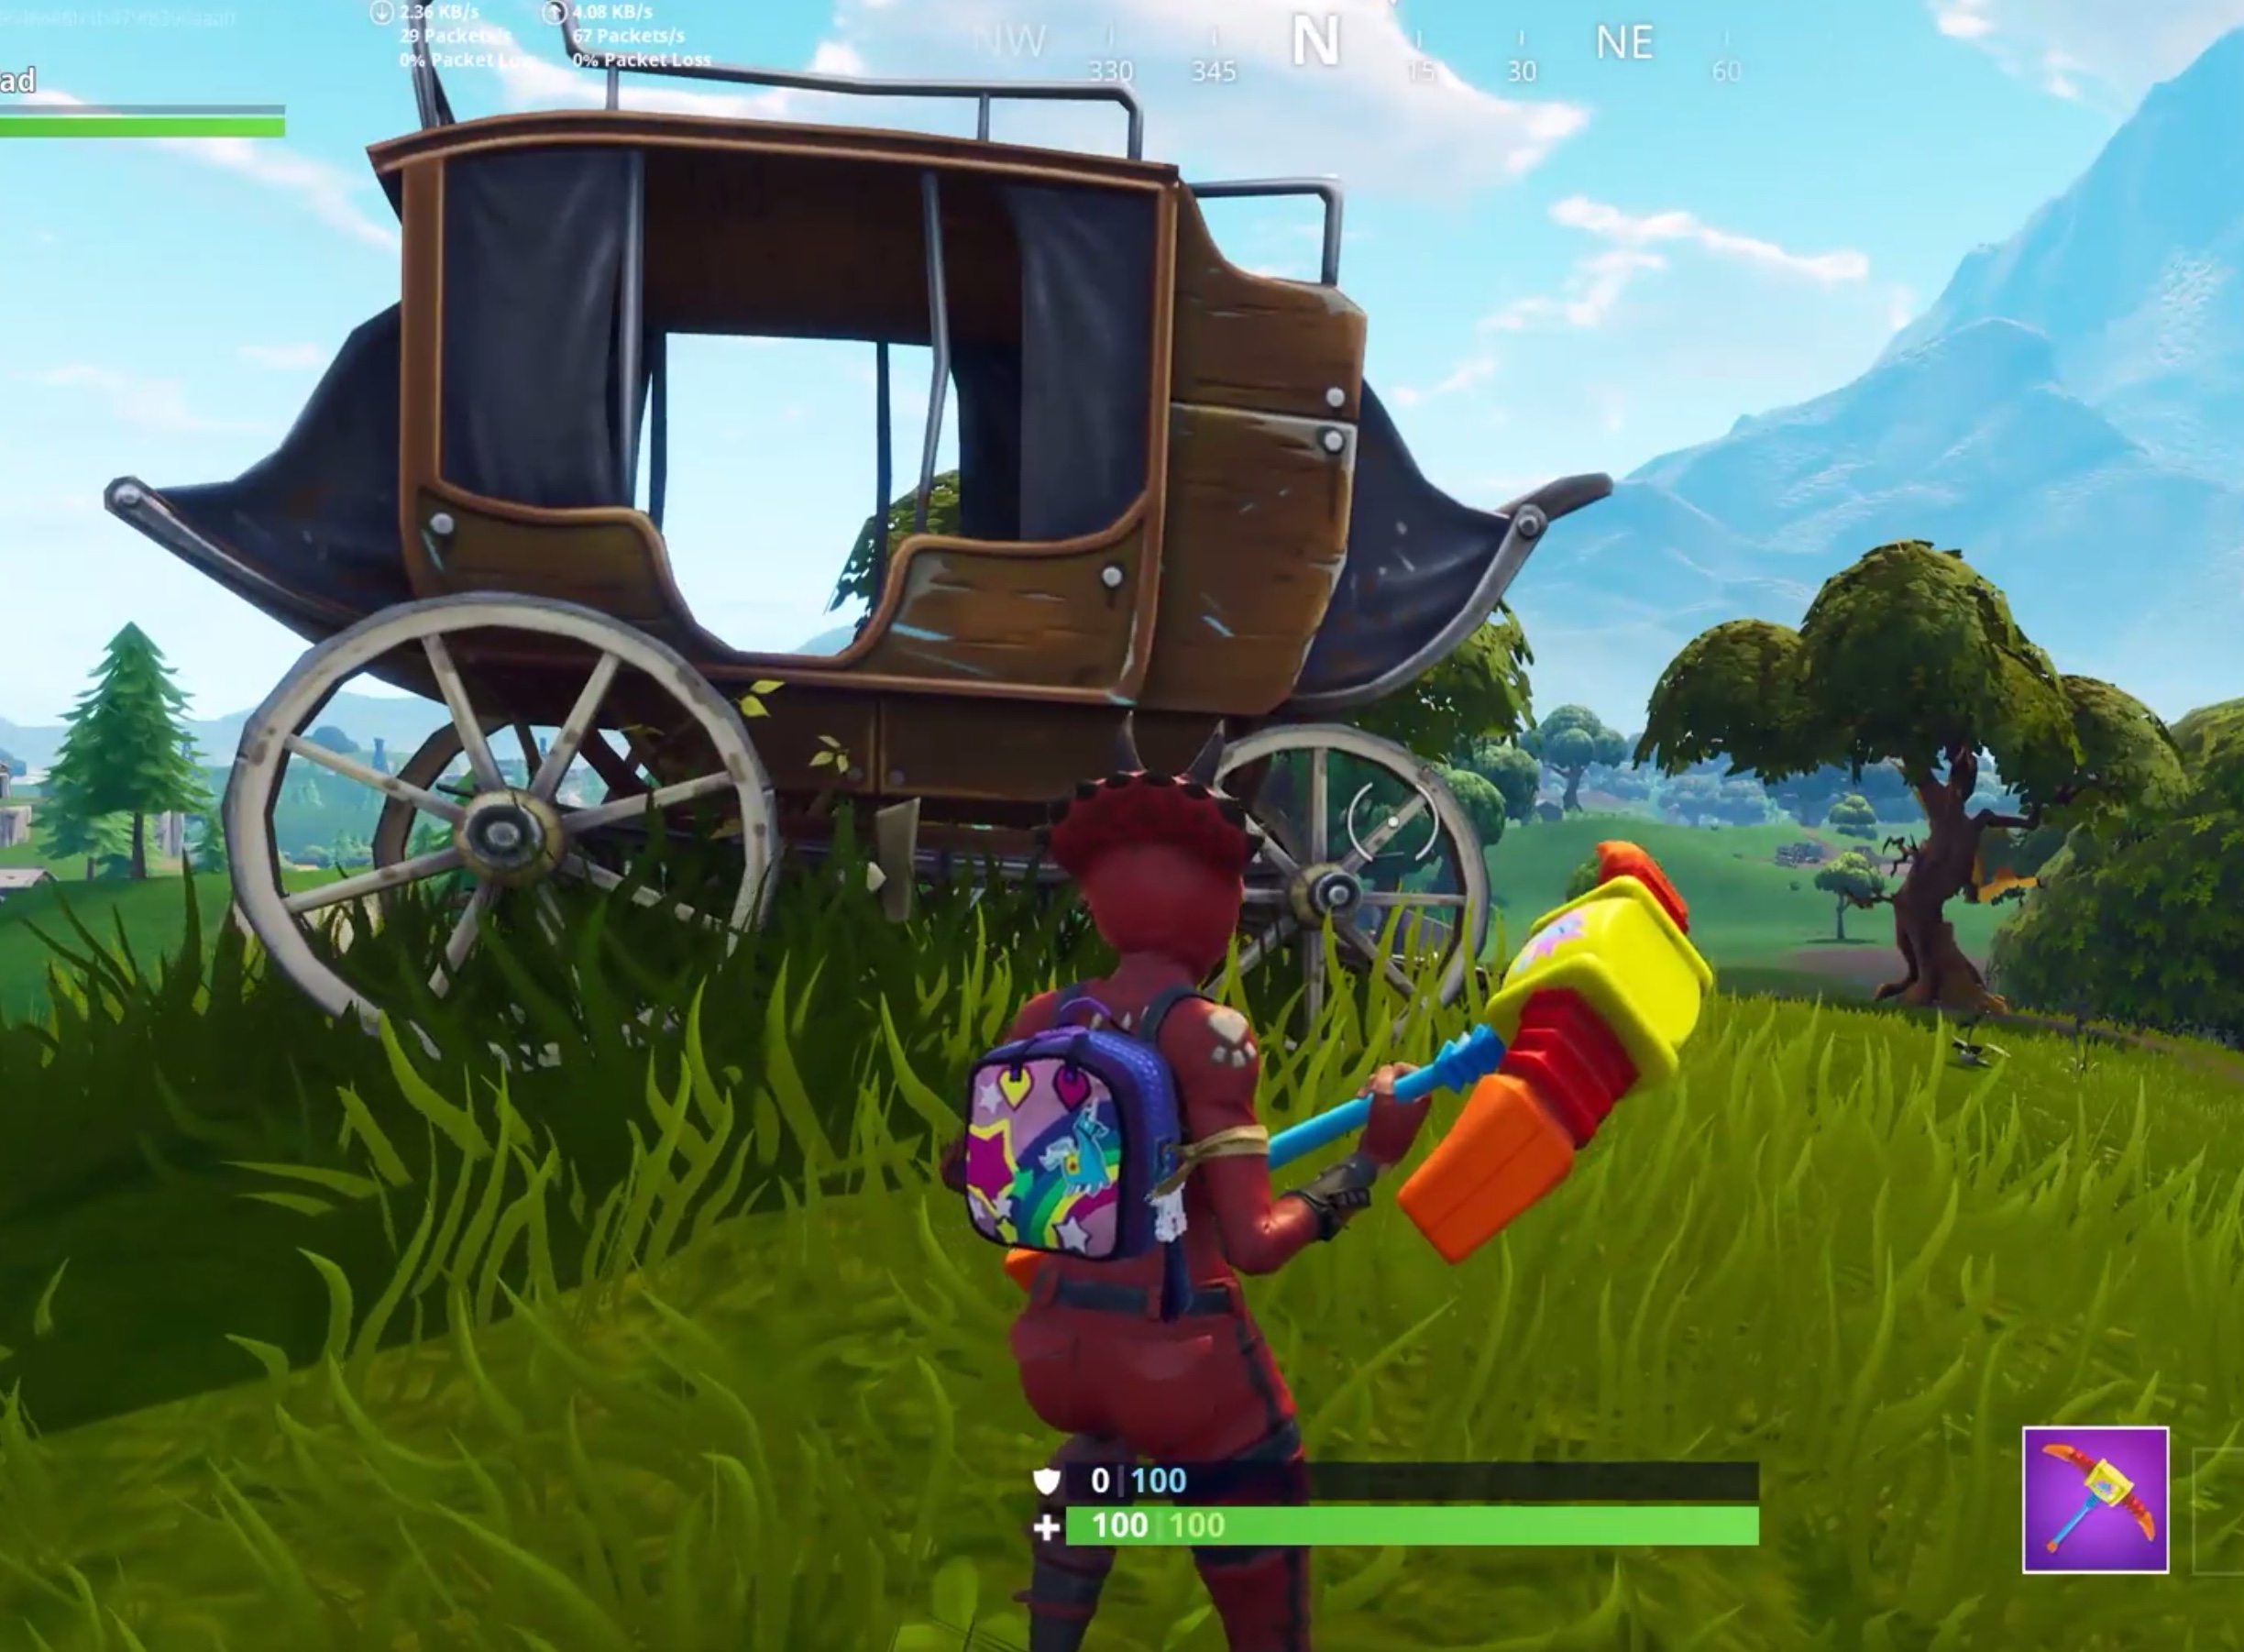 Fortnite’s Void Spits Out Western-Style Stage Wagon